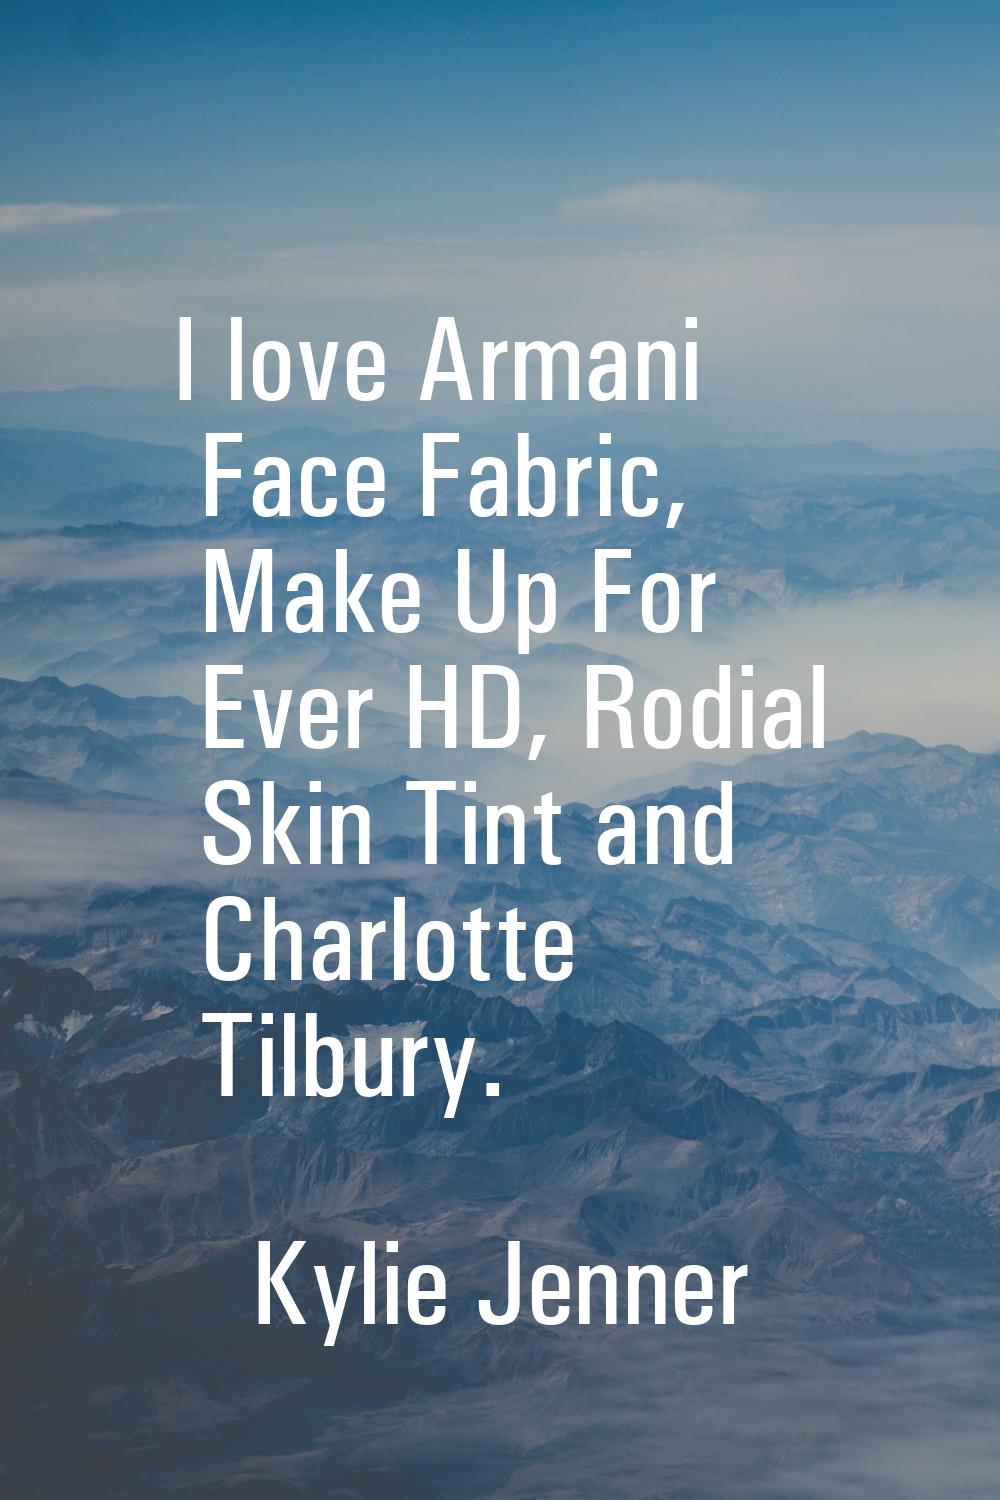 I love Armani Face Fabric, Make Up For Ever HD, Rodial Skin Tint and Charlotte Tilbury.